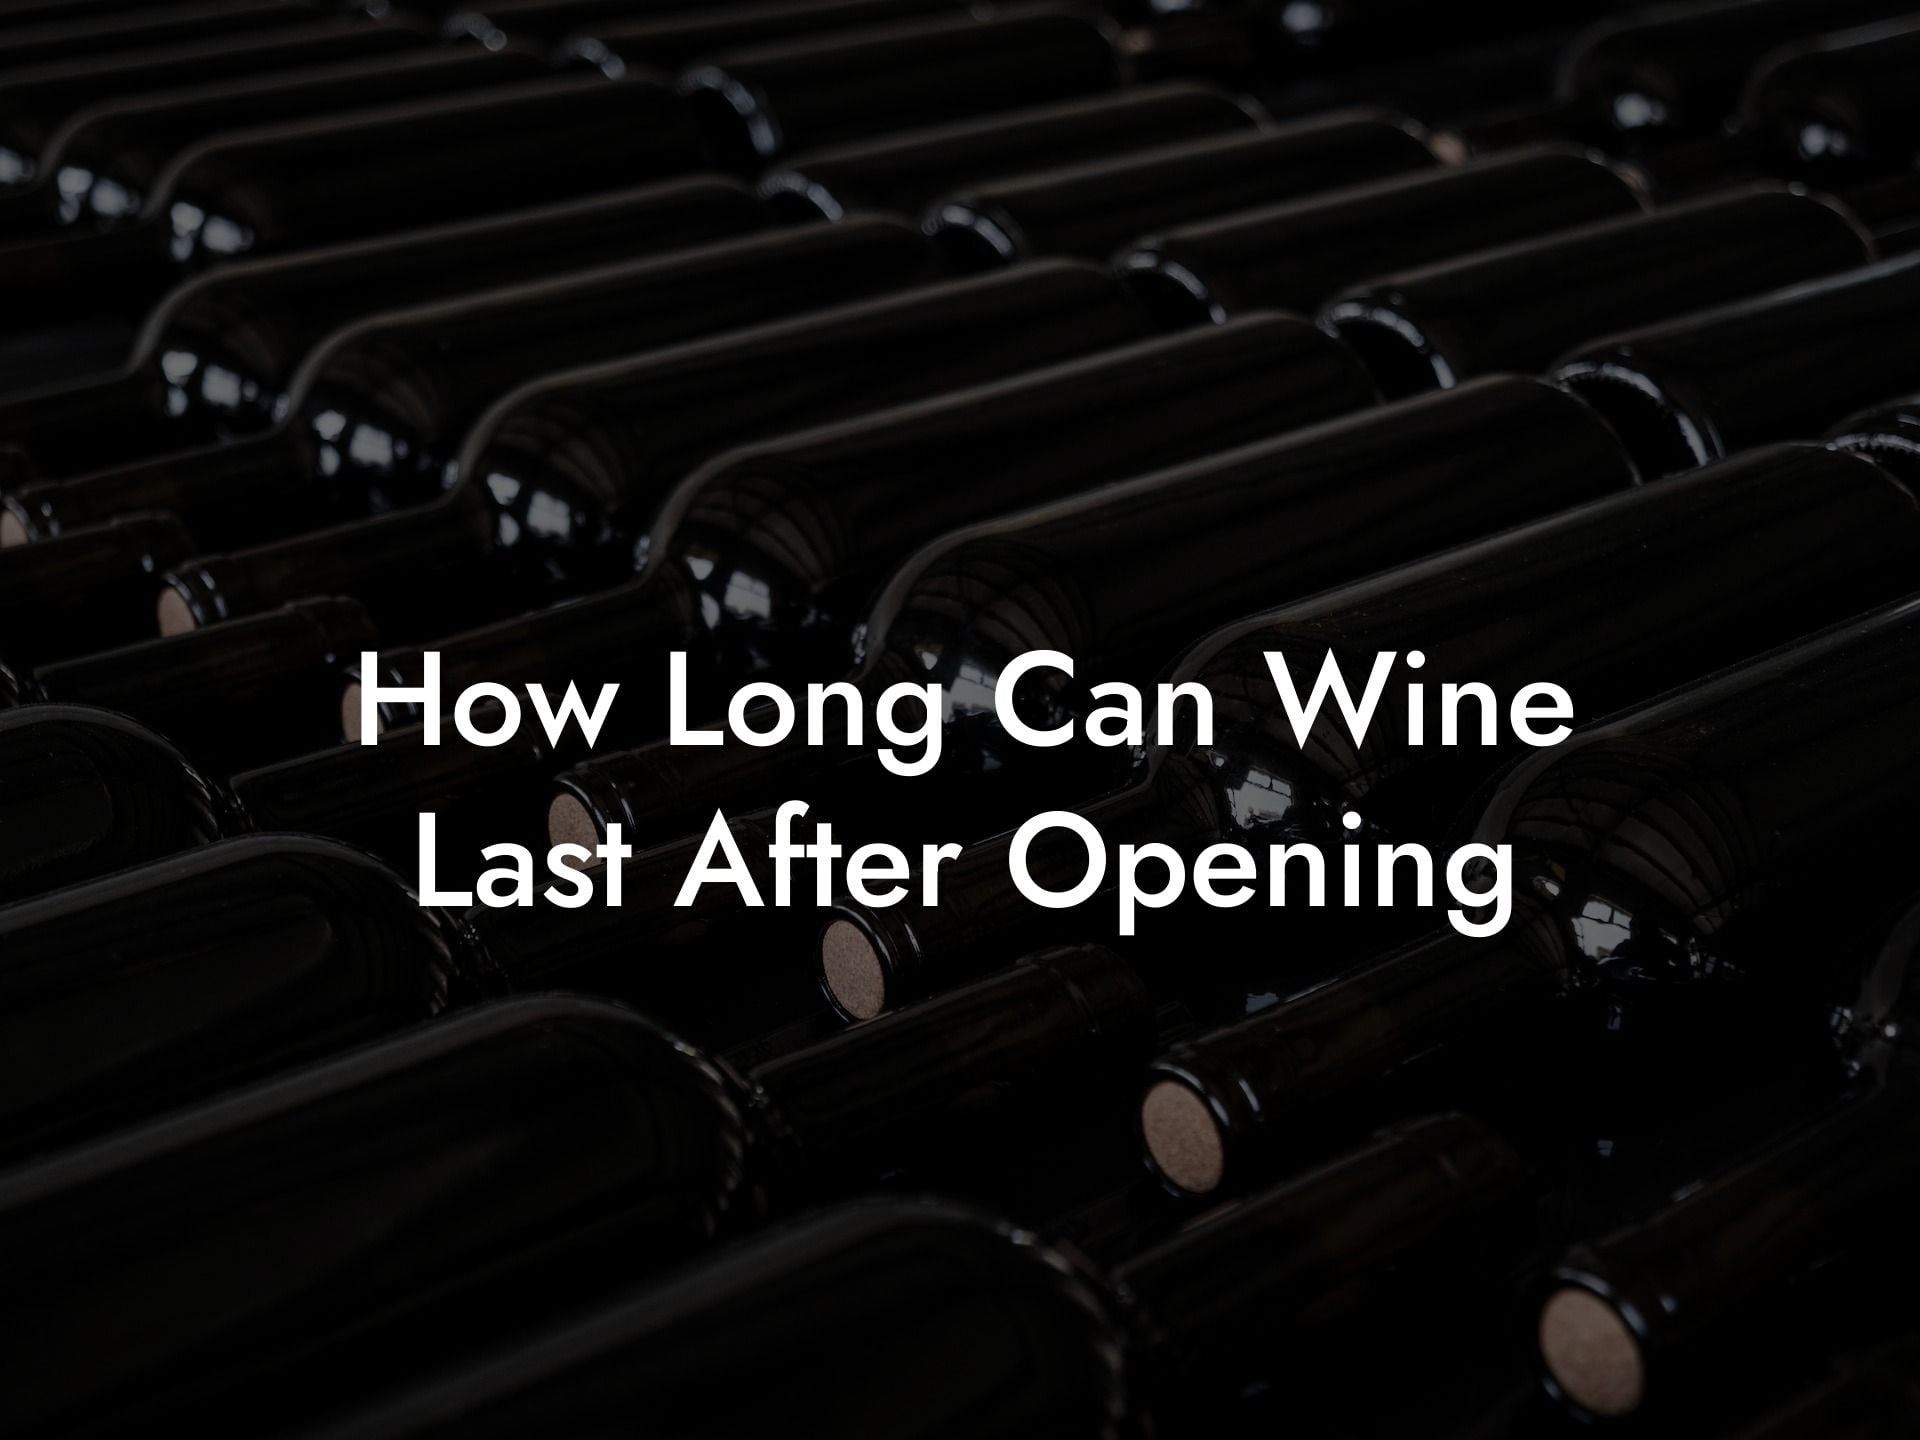 How Long Can Wine Last After Opening